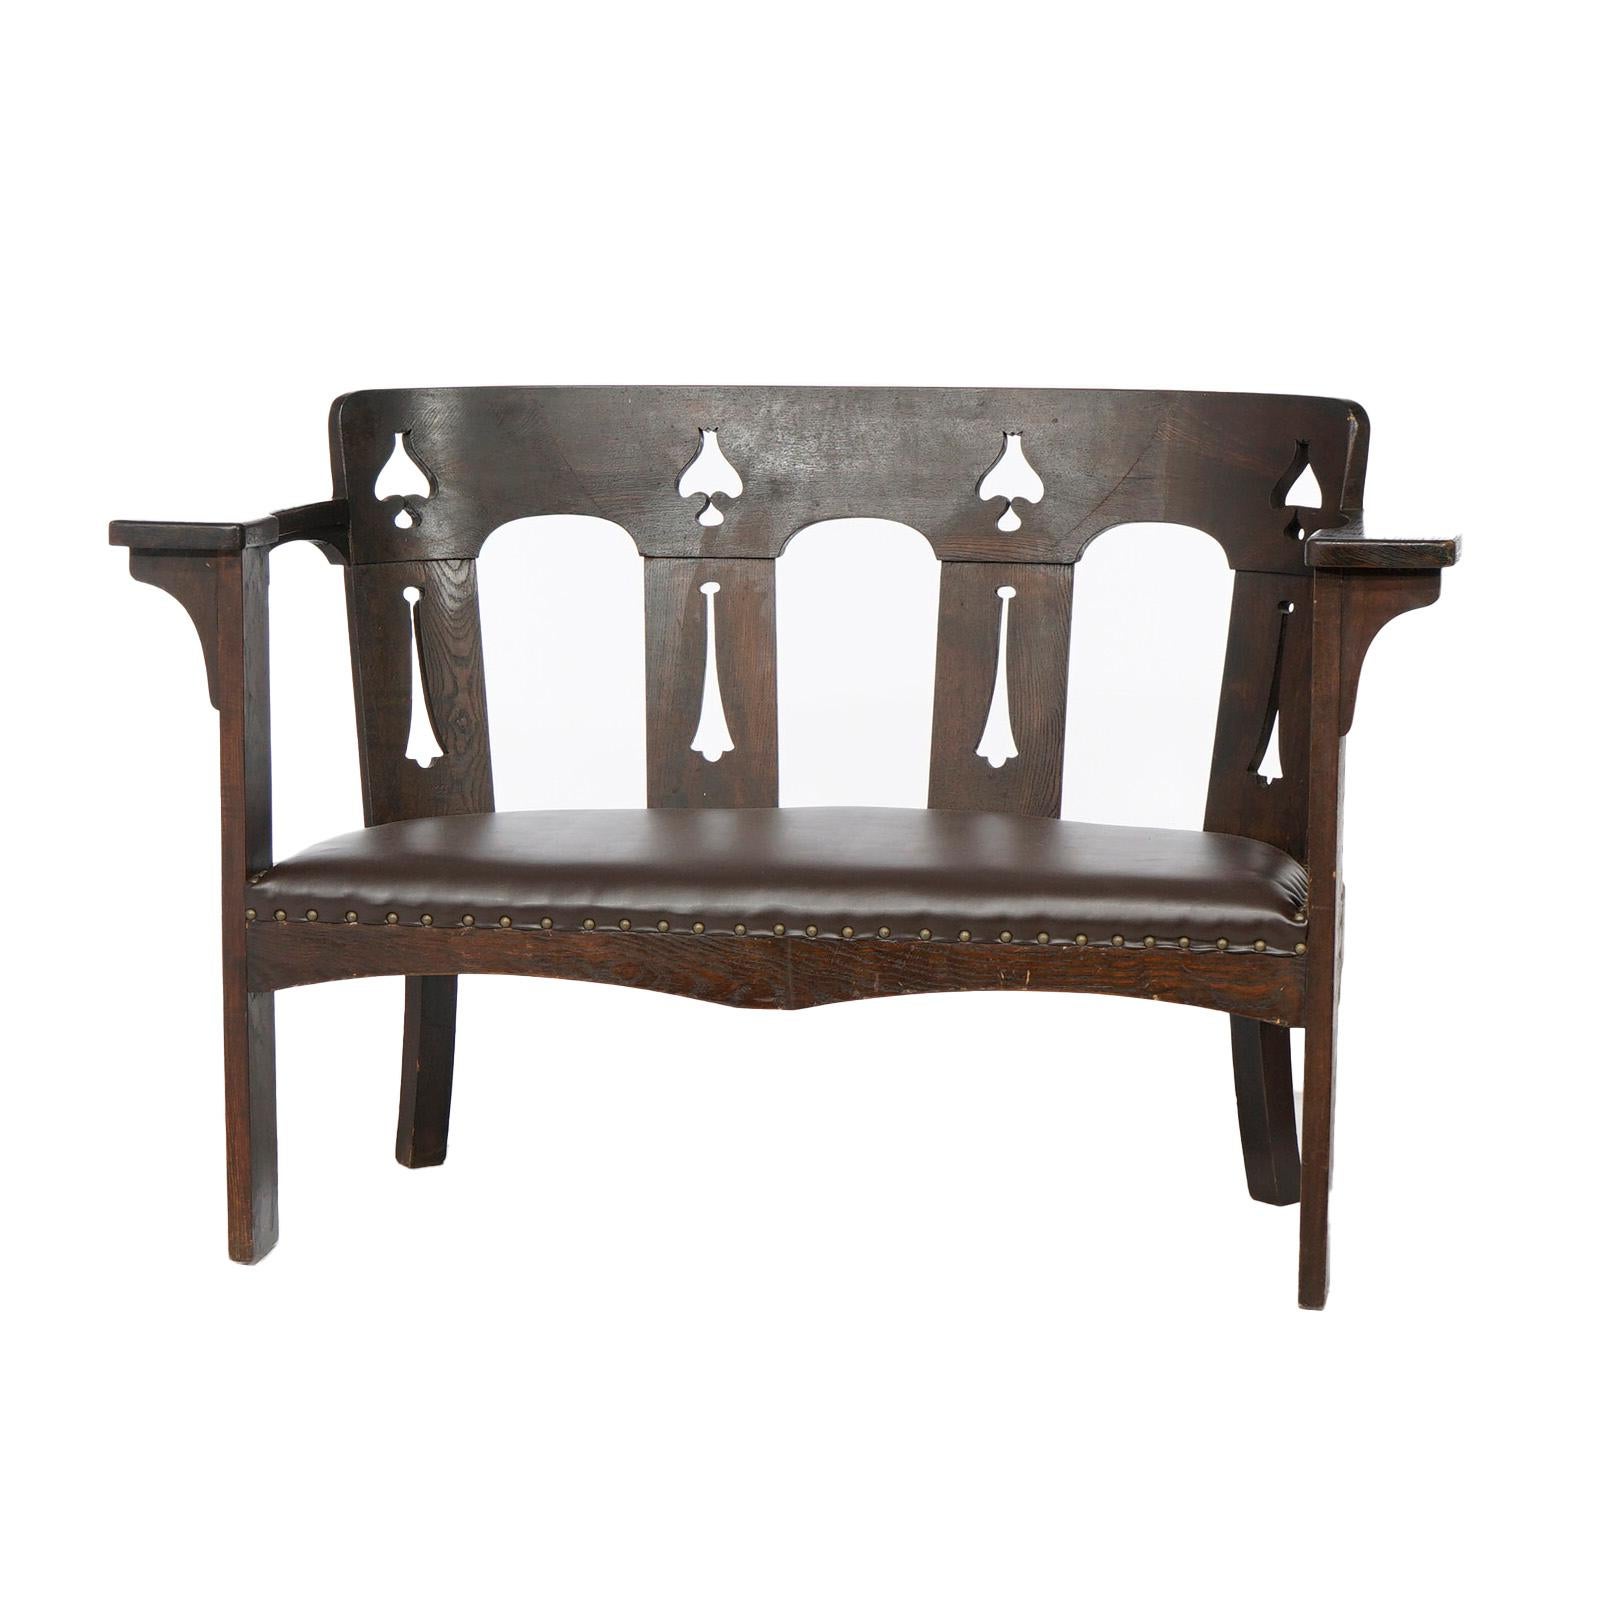 An antique Arts and Crafts settee in the manner of Limbert offers oak construction with curved slat back having cut-out stylized floral elements over upholstered seat and flat arms, c1910

Measures- 34.75''H x 54''W x 24''D

*Ask about DISCOUNTED